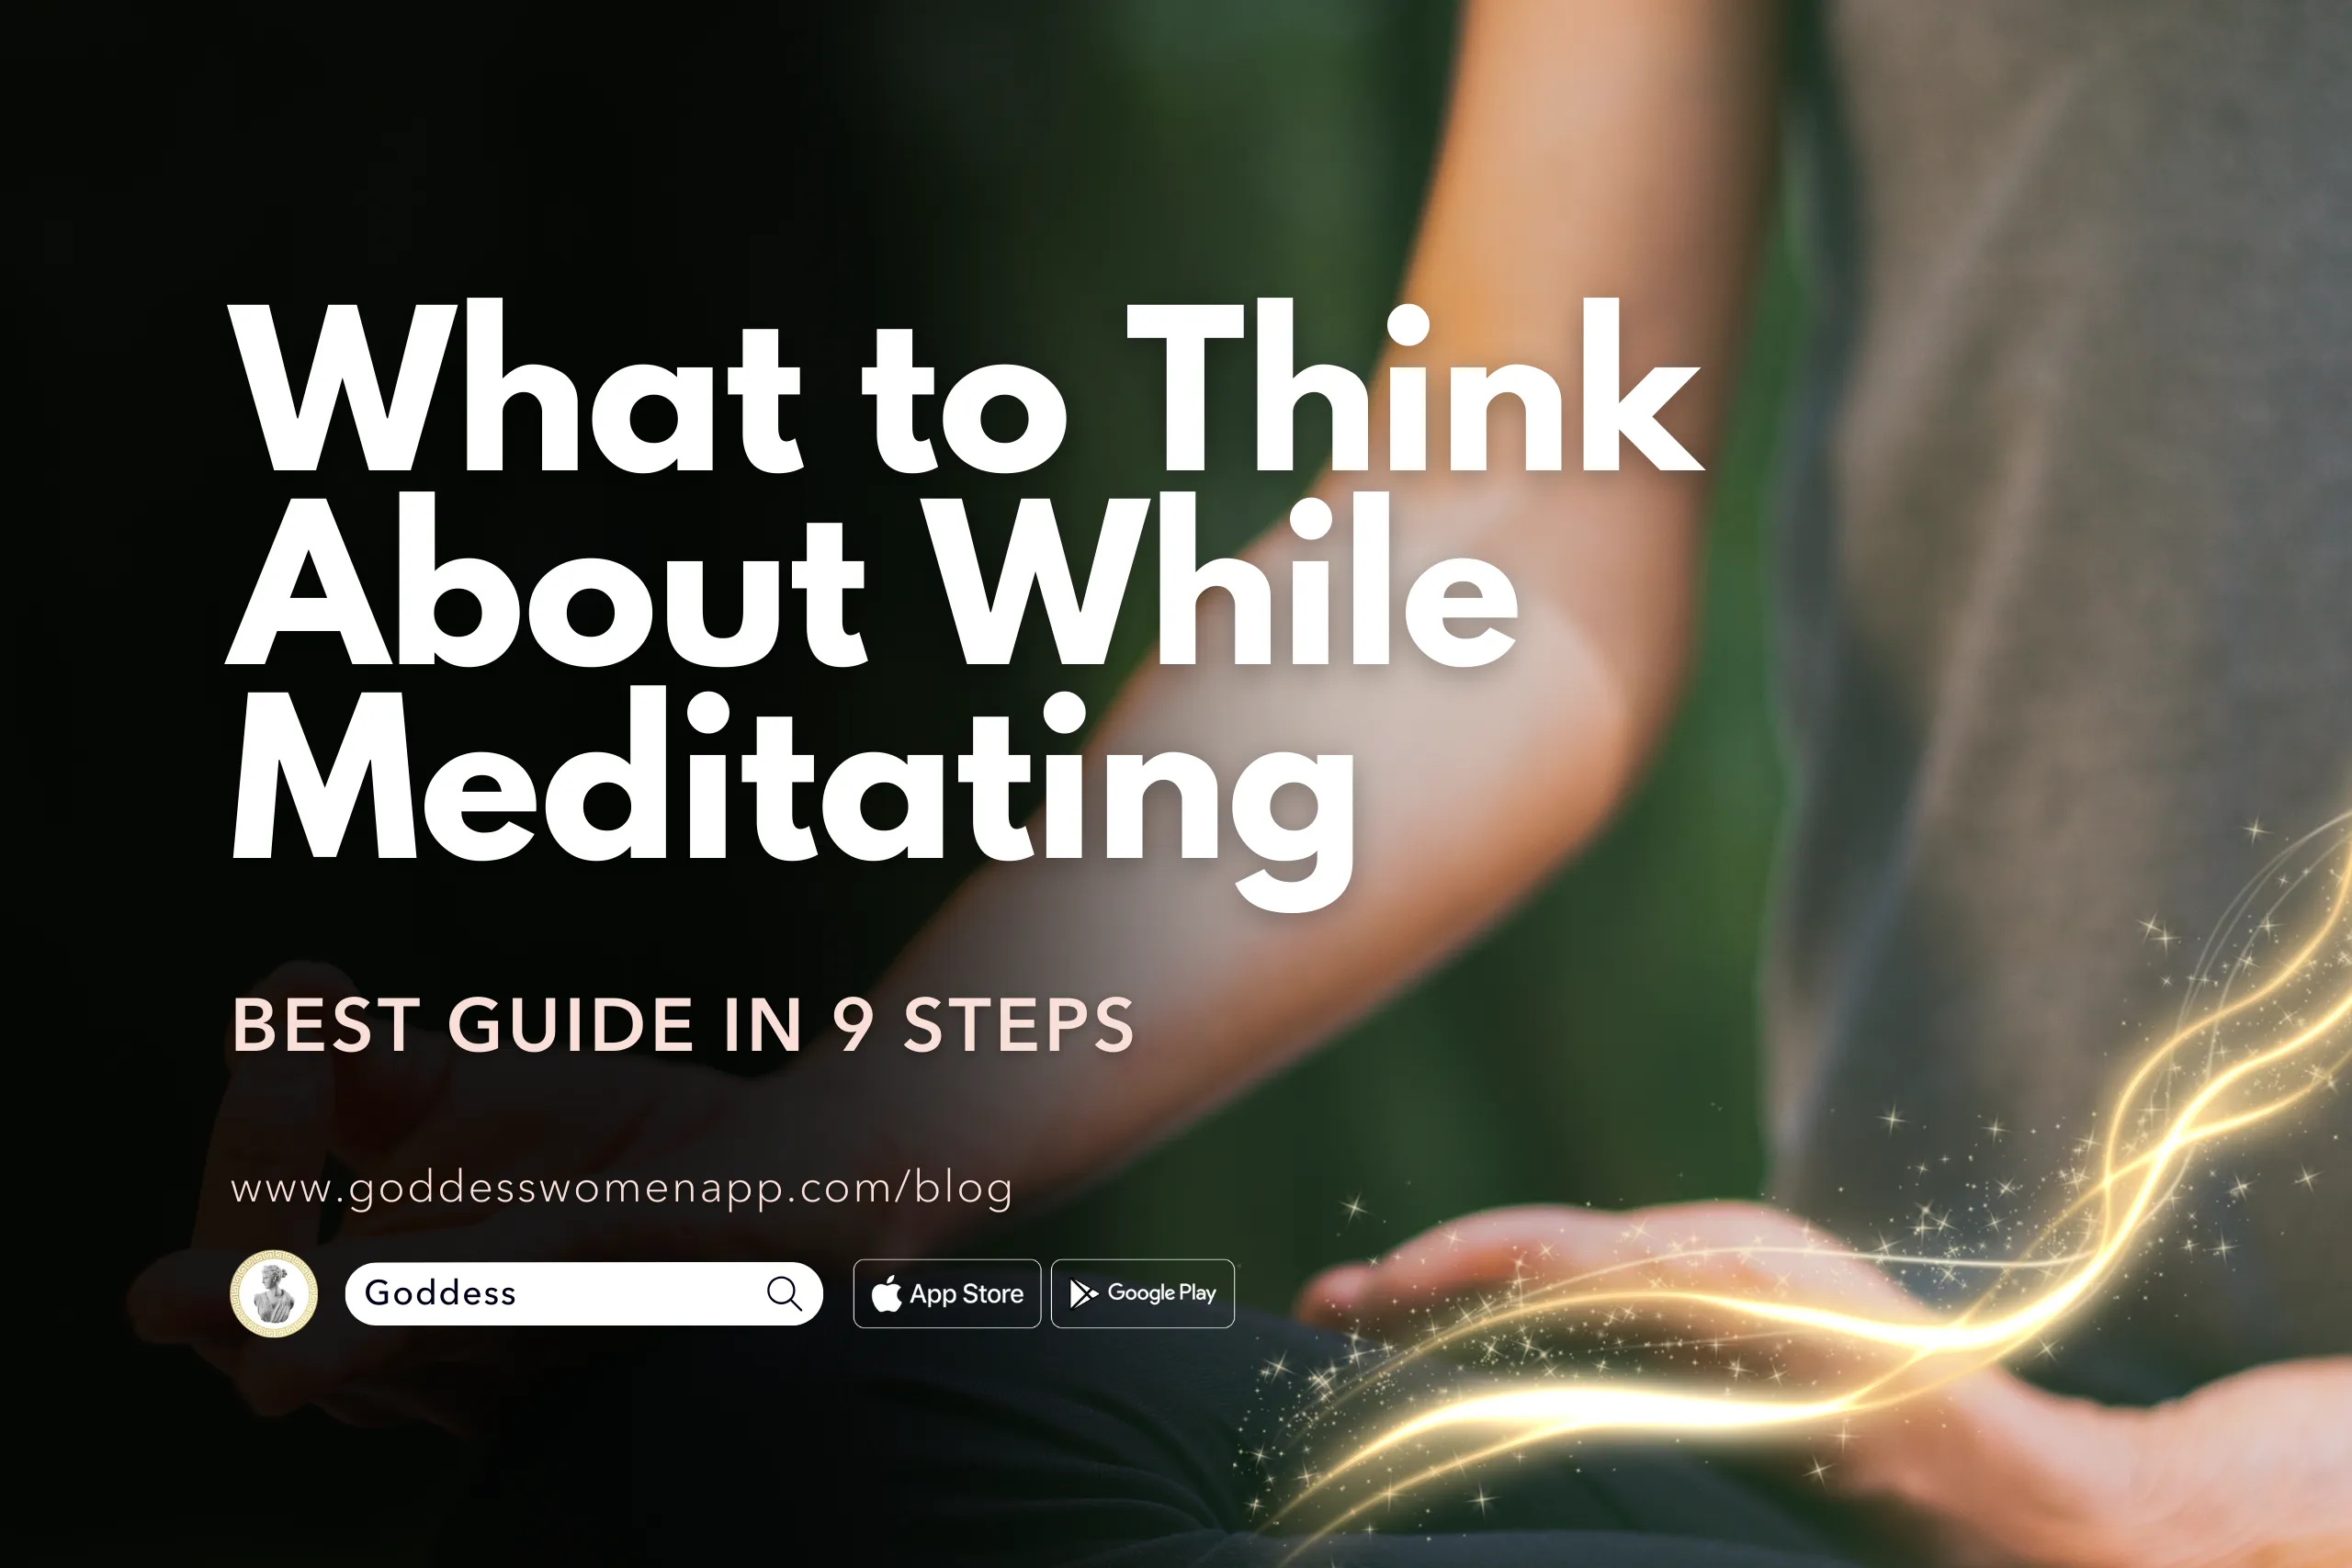 What to Think About While Meditating: Best Guide in 9 Steps